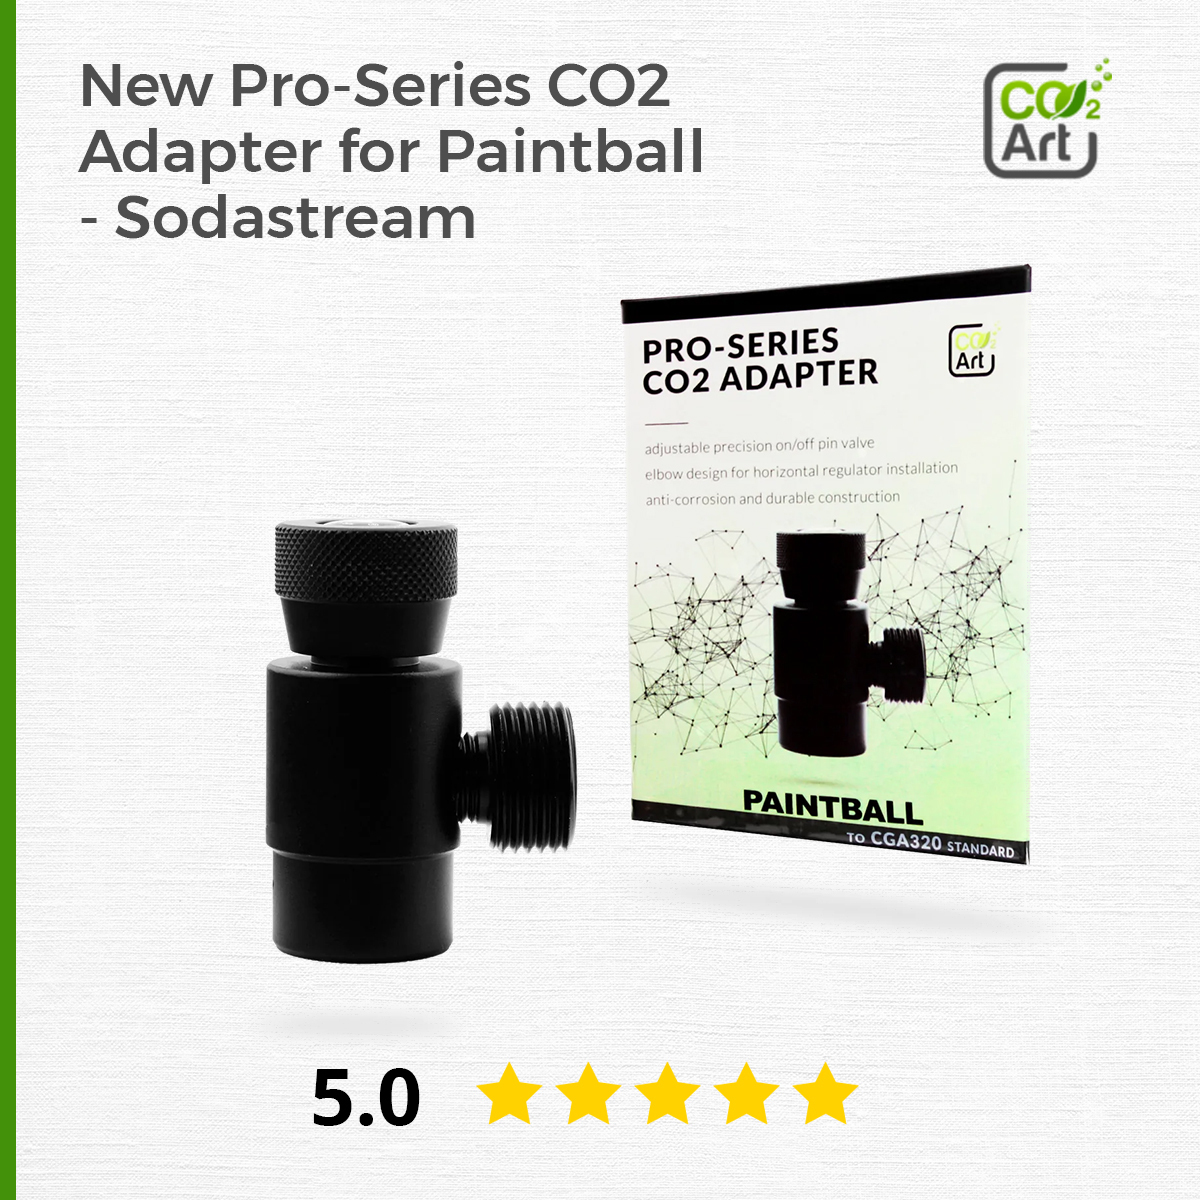 Pro-Series Adapter by CO2Art